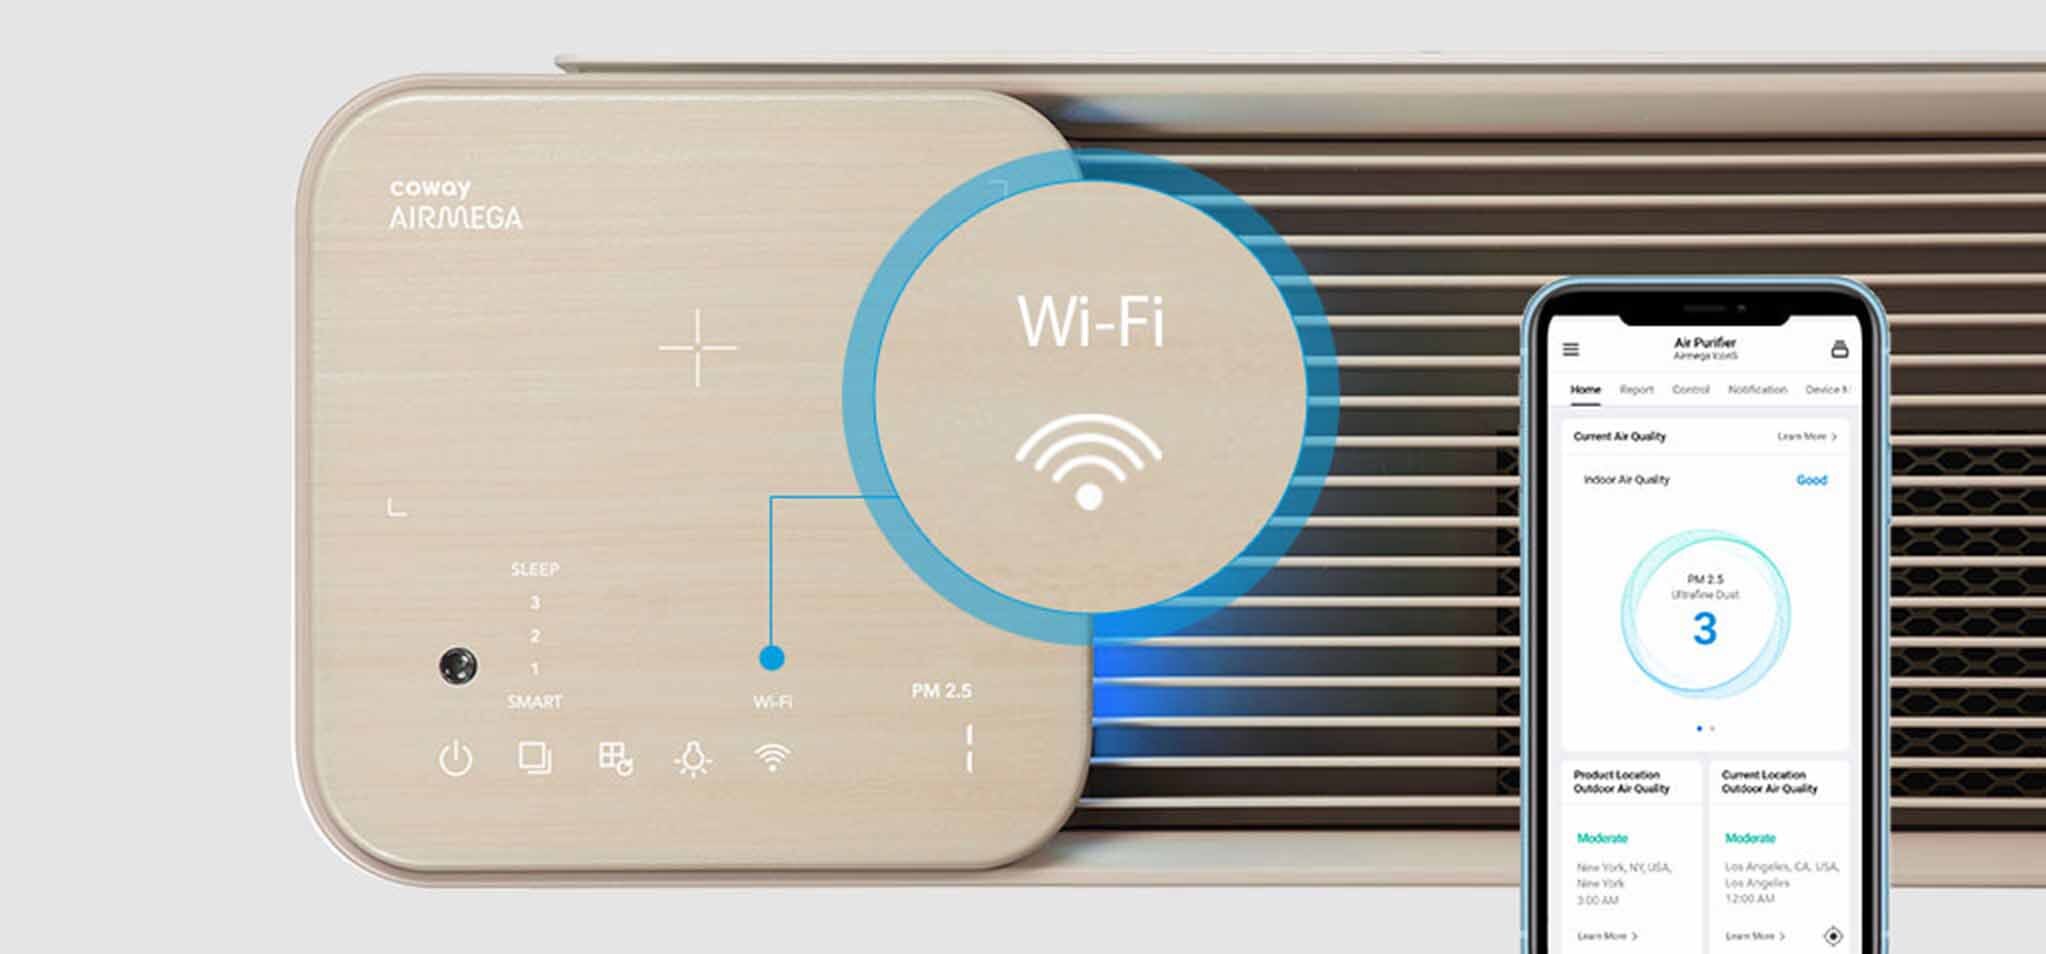 Airmega IconS Wifi Enabled